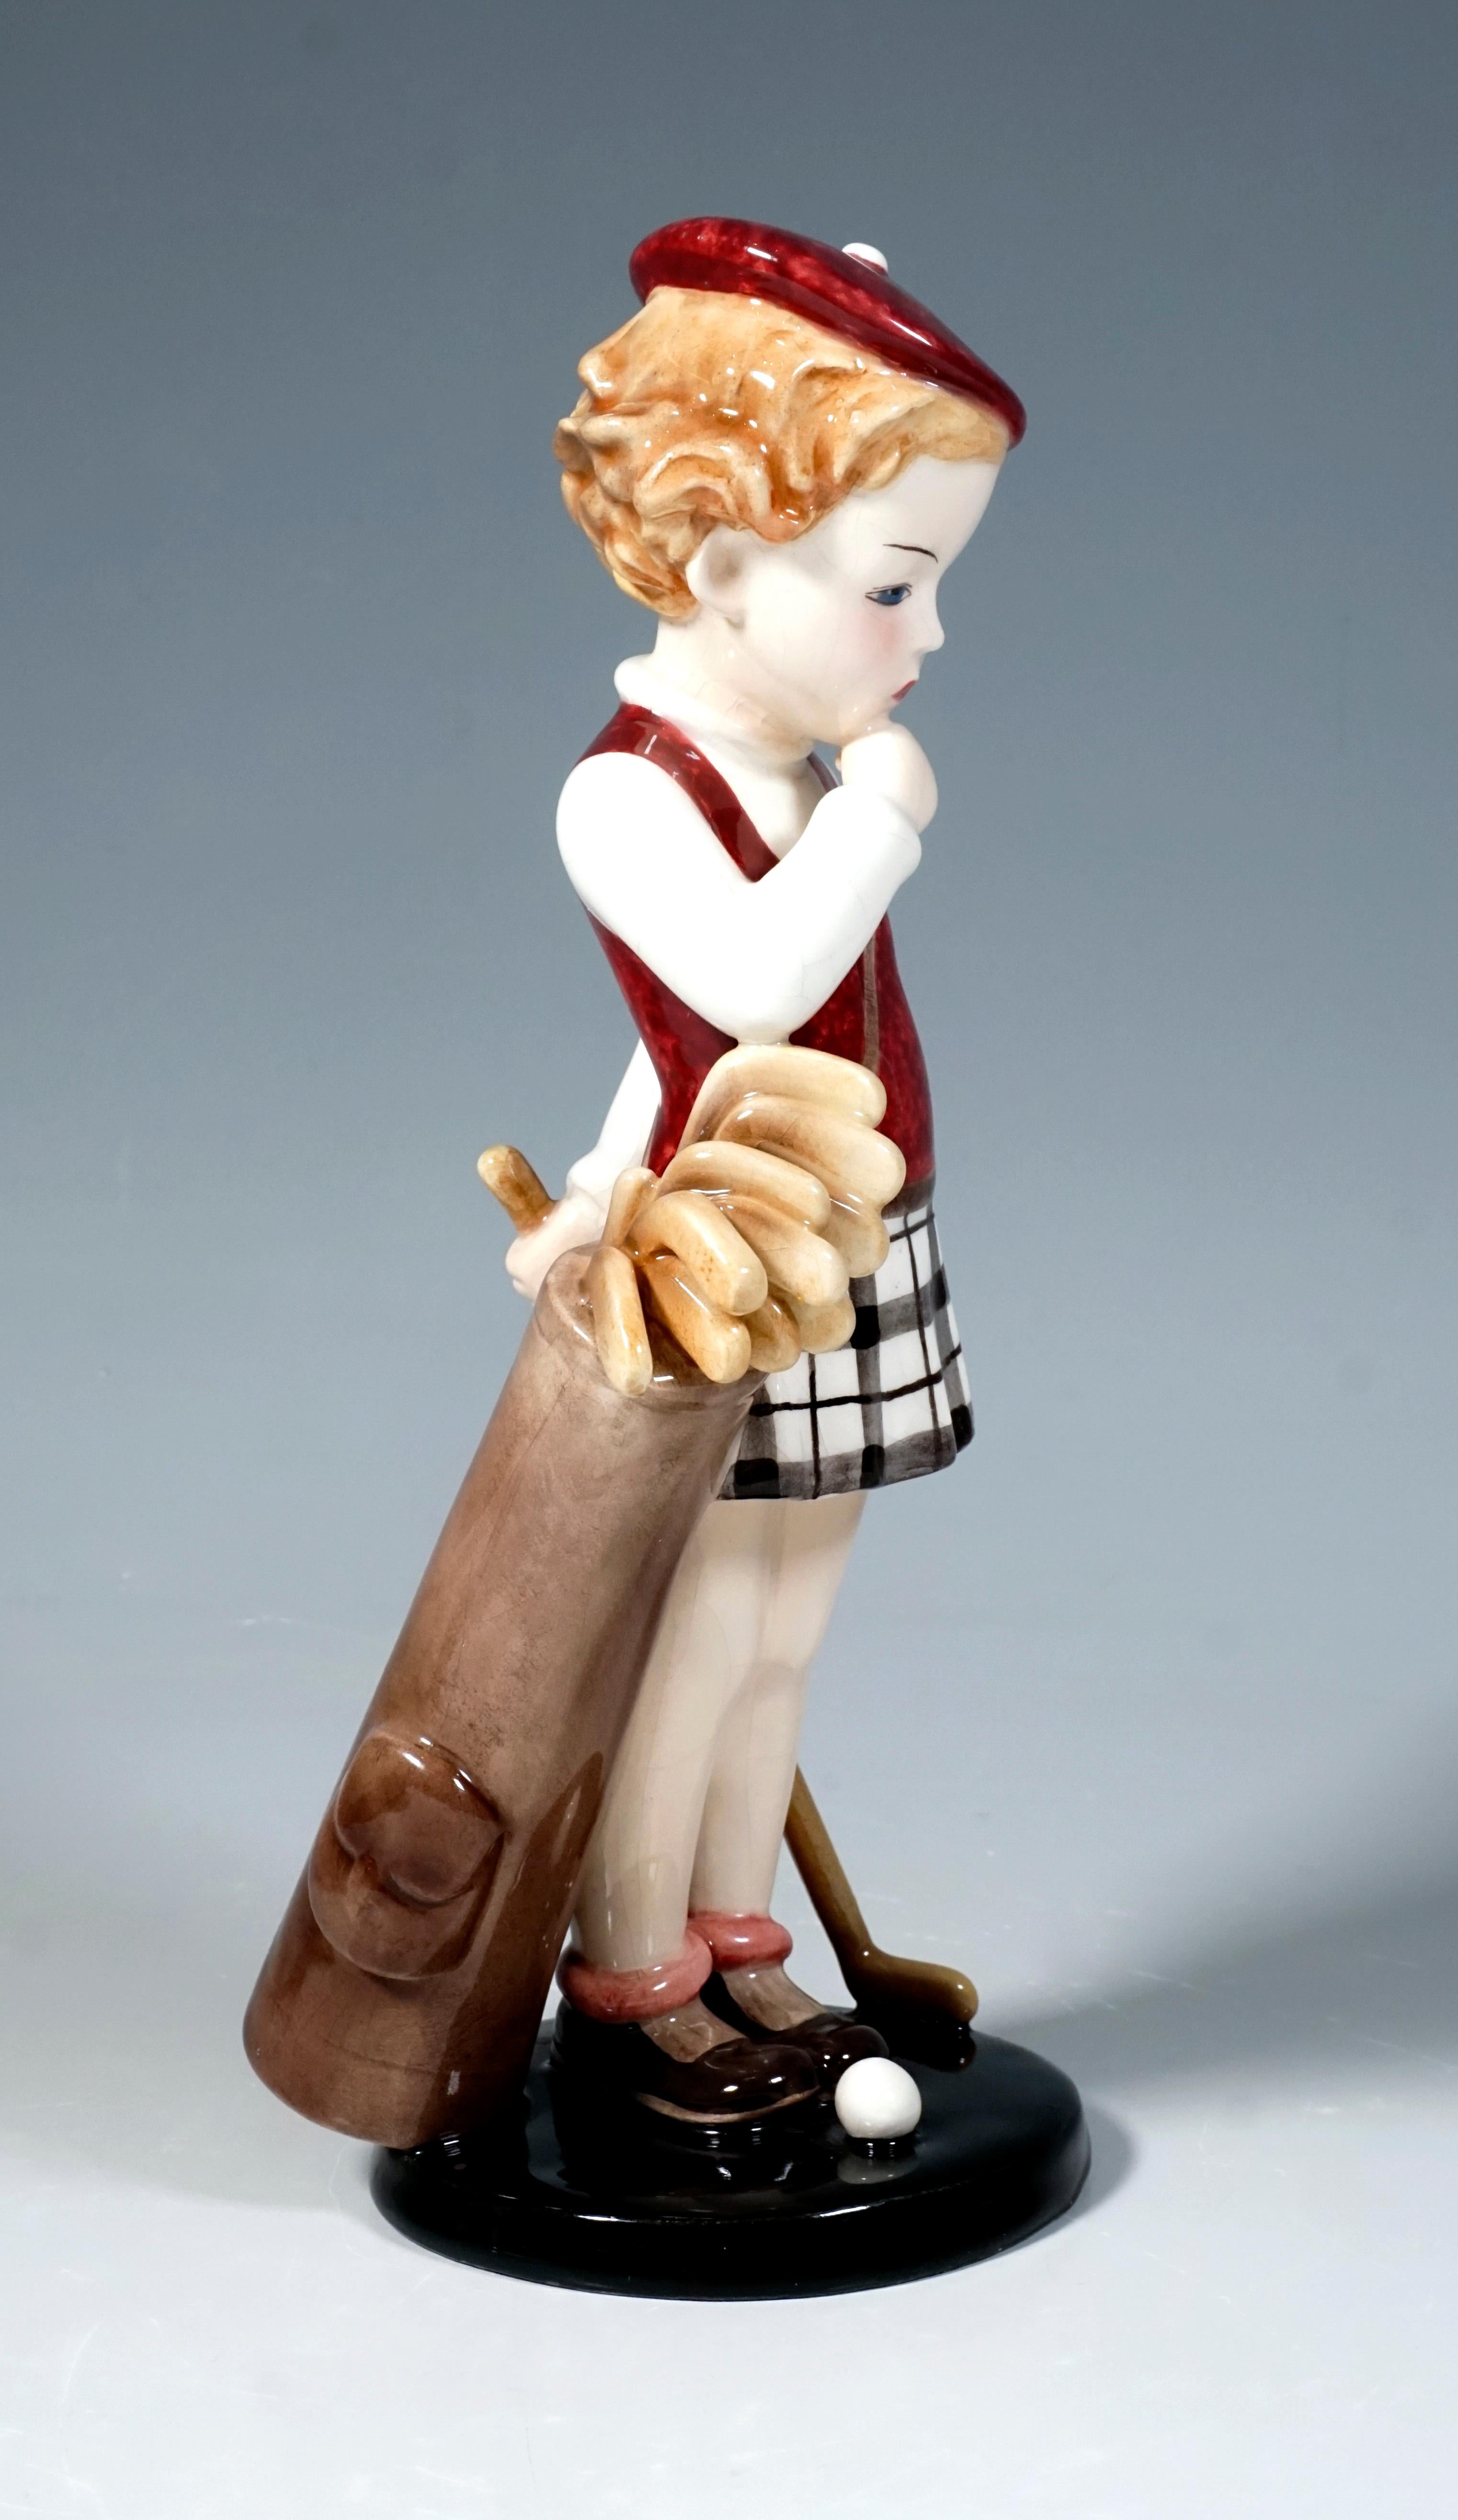 Goldscheider Vienna figurine of the 1930s.
Standing girl in golf clothes: camisole with red pollunder, checked skirt and red beret, carrying a golf bag with clubs and holding a club behind her.
On a black, round base.

Designed by Stephan Dakon